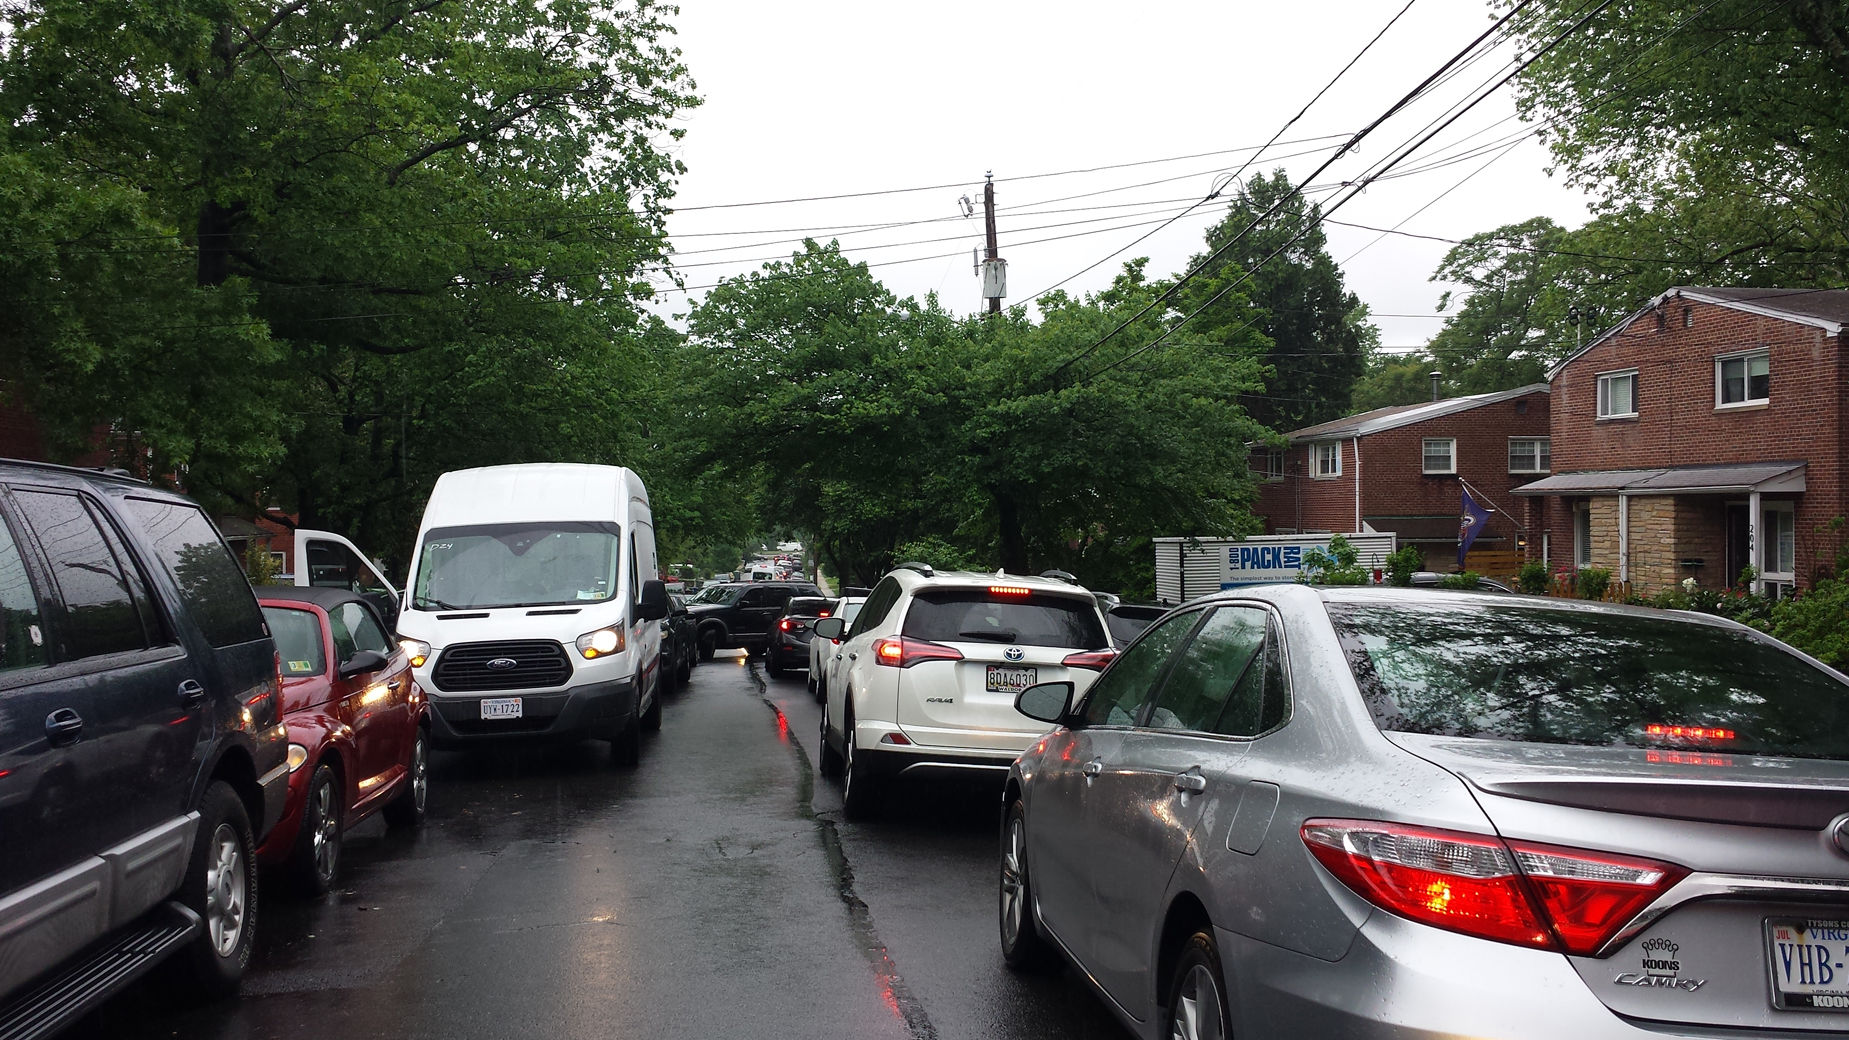 The cars on the right are parked on East Taylor Run Parkway, a two-way street that frequently gets backed up as drivers cut through the Alexandria neighborhood to get to Capital Beltway and southern Fairfax County. Drivers frequently block the street so that others coming the other way cannot use the road. This photo was taken on May 16, 2018. WTOP/Colleen Kelleher)